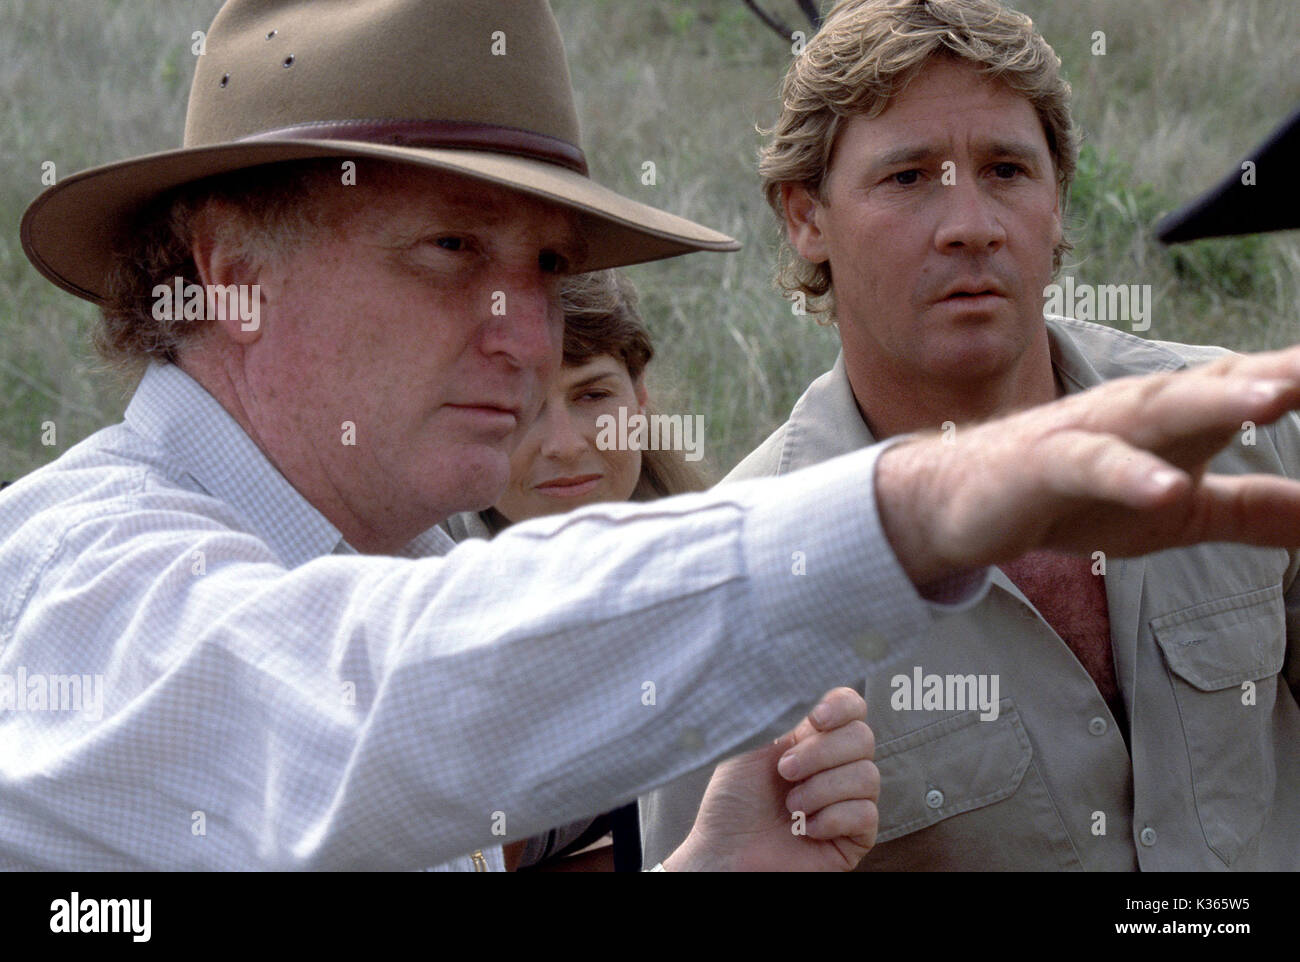 THE CROCODILE HUNTER: COLLISION COURSE STEVE IRWIN and TERRI IRWIN get direction from director/producer JOHN STAINTON in Metro-Goldwyn-Mayer Pictures adventure comedy Photo by: Greg Barrett Stock Photo